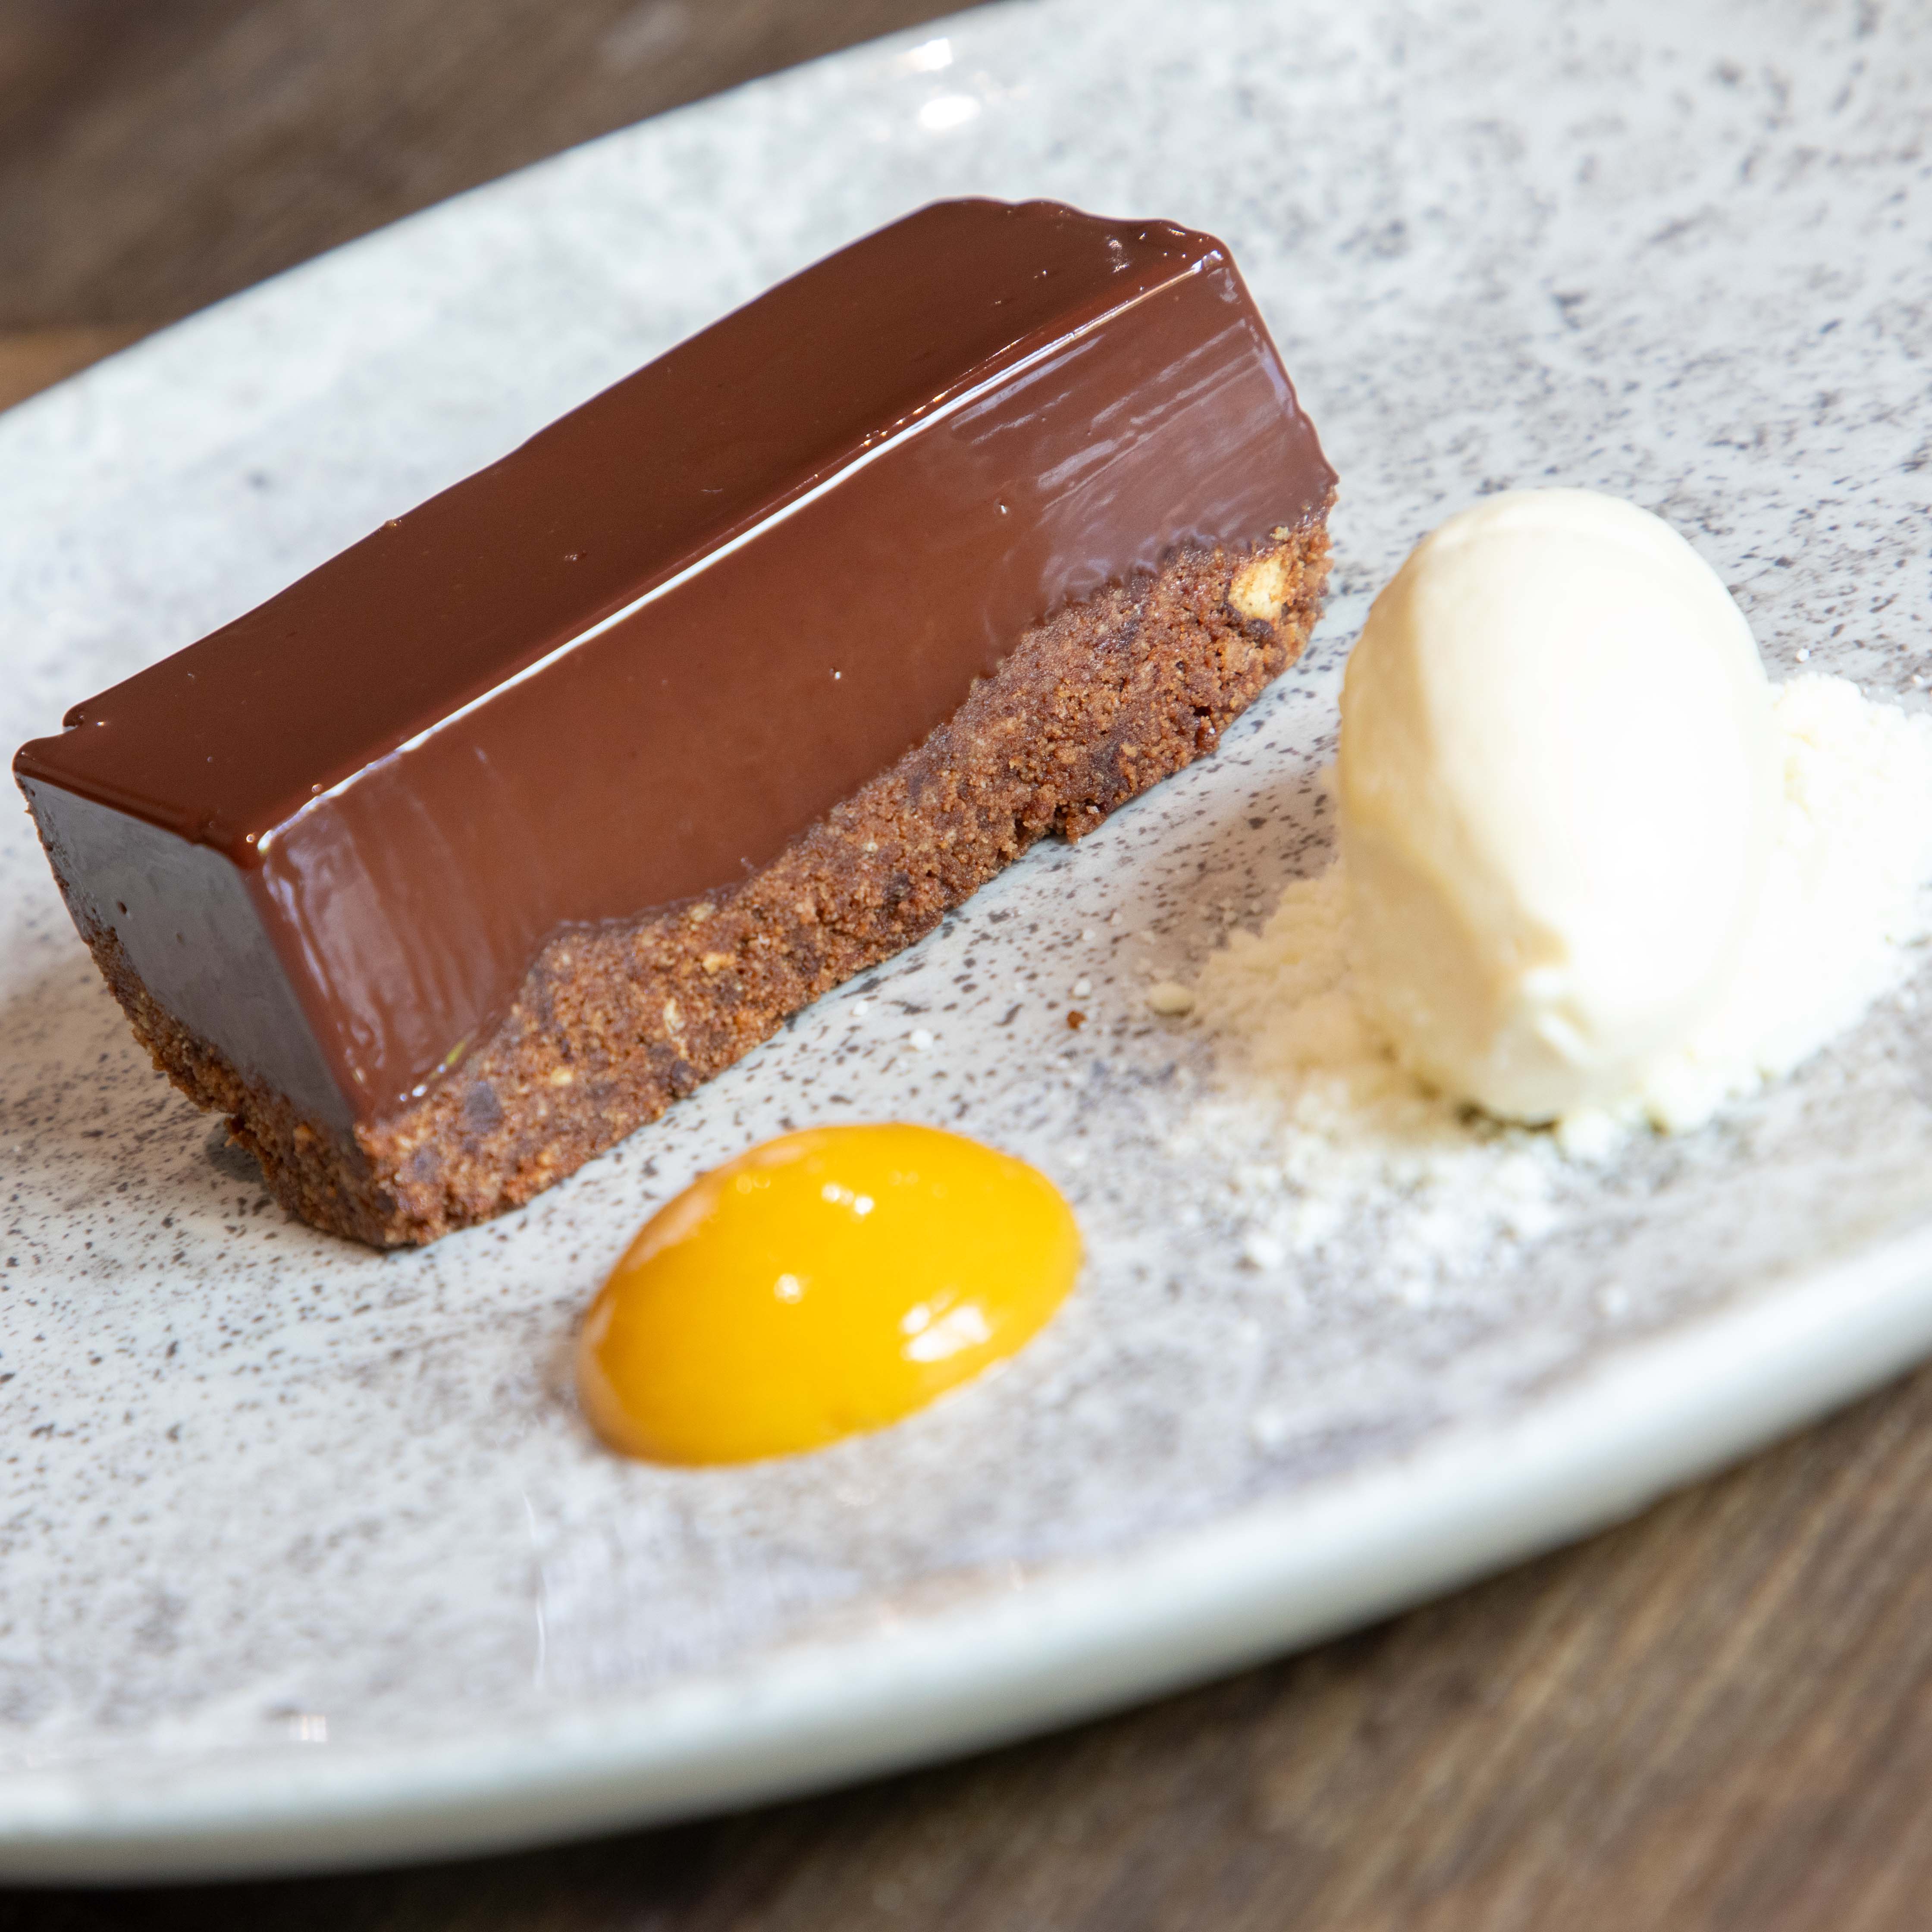 Chocolate torte at The Dower House, Woodhall Spa.